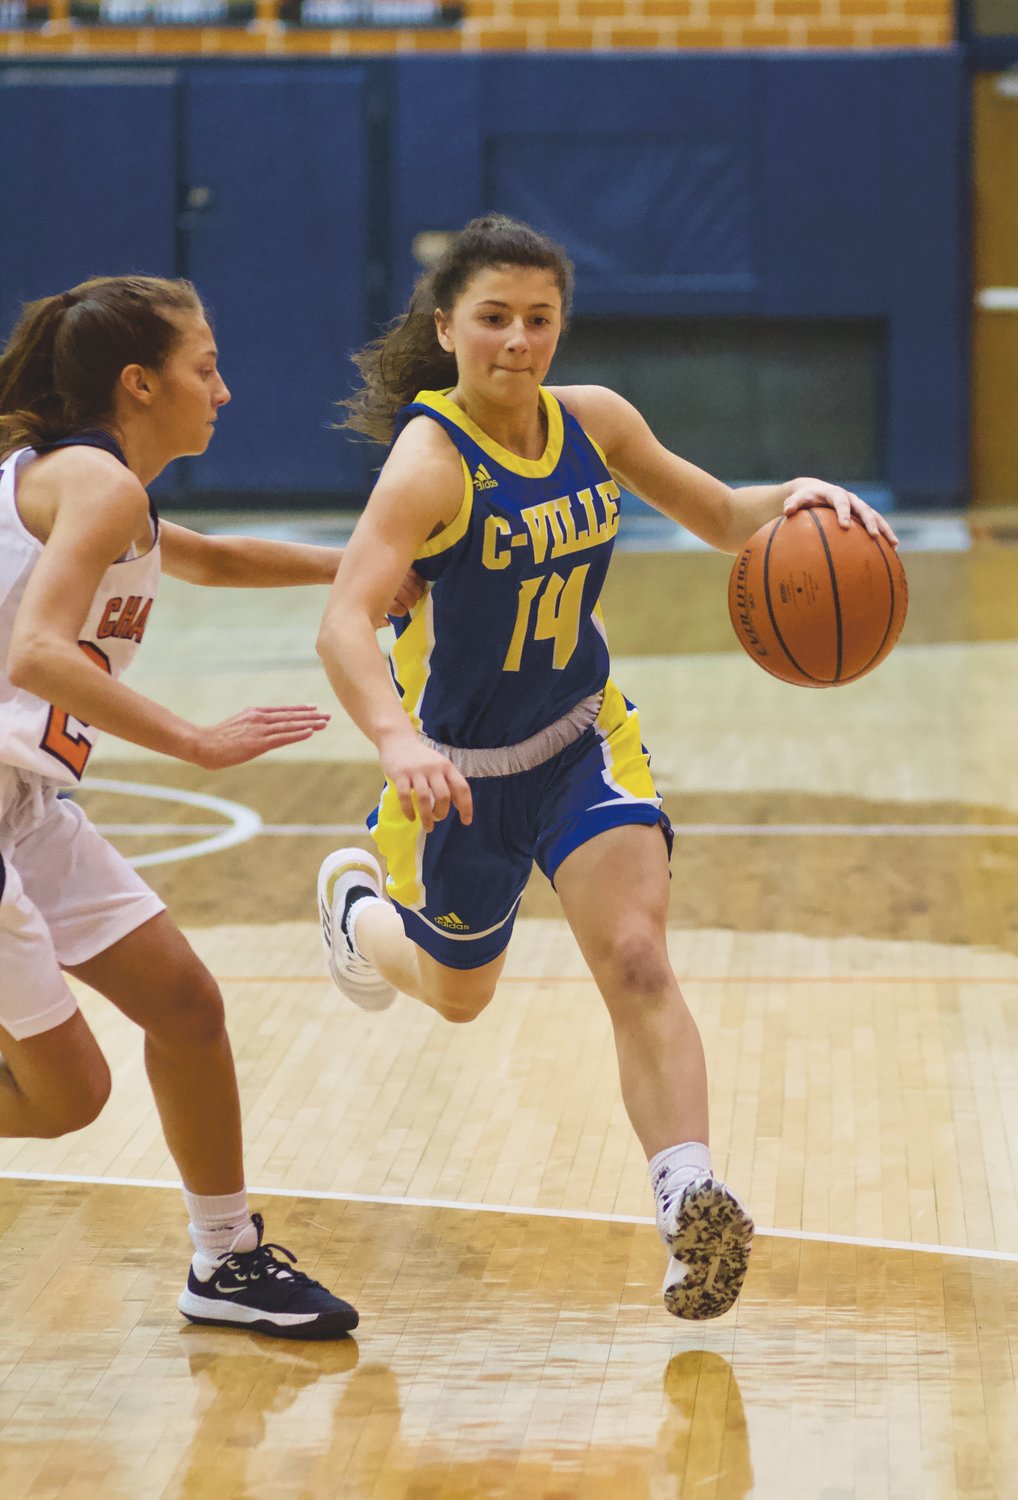 Crawfordsville's Shea Williamson drives past North Montgomery's Maddie Moseley. Williamson led the Athenians with 16 points in their loss to the Chargers.